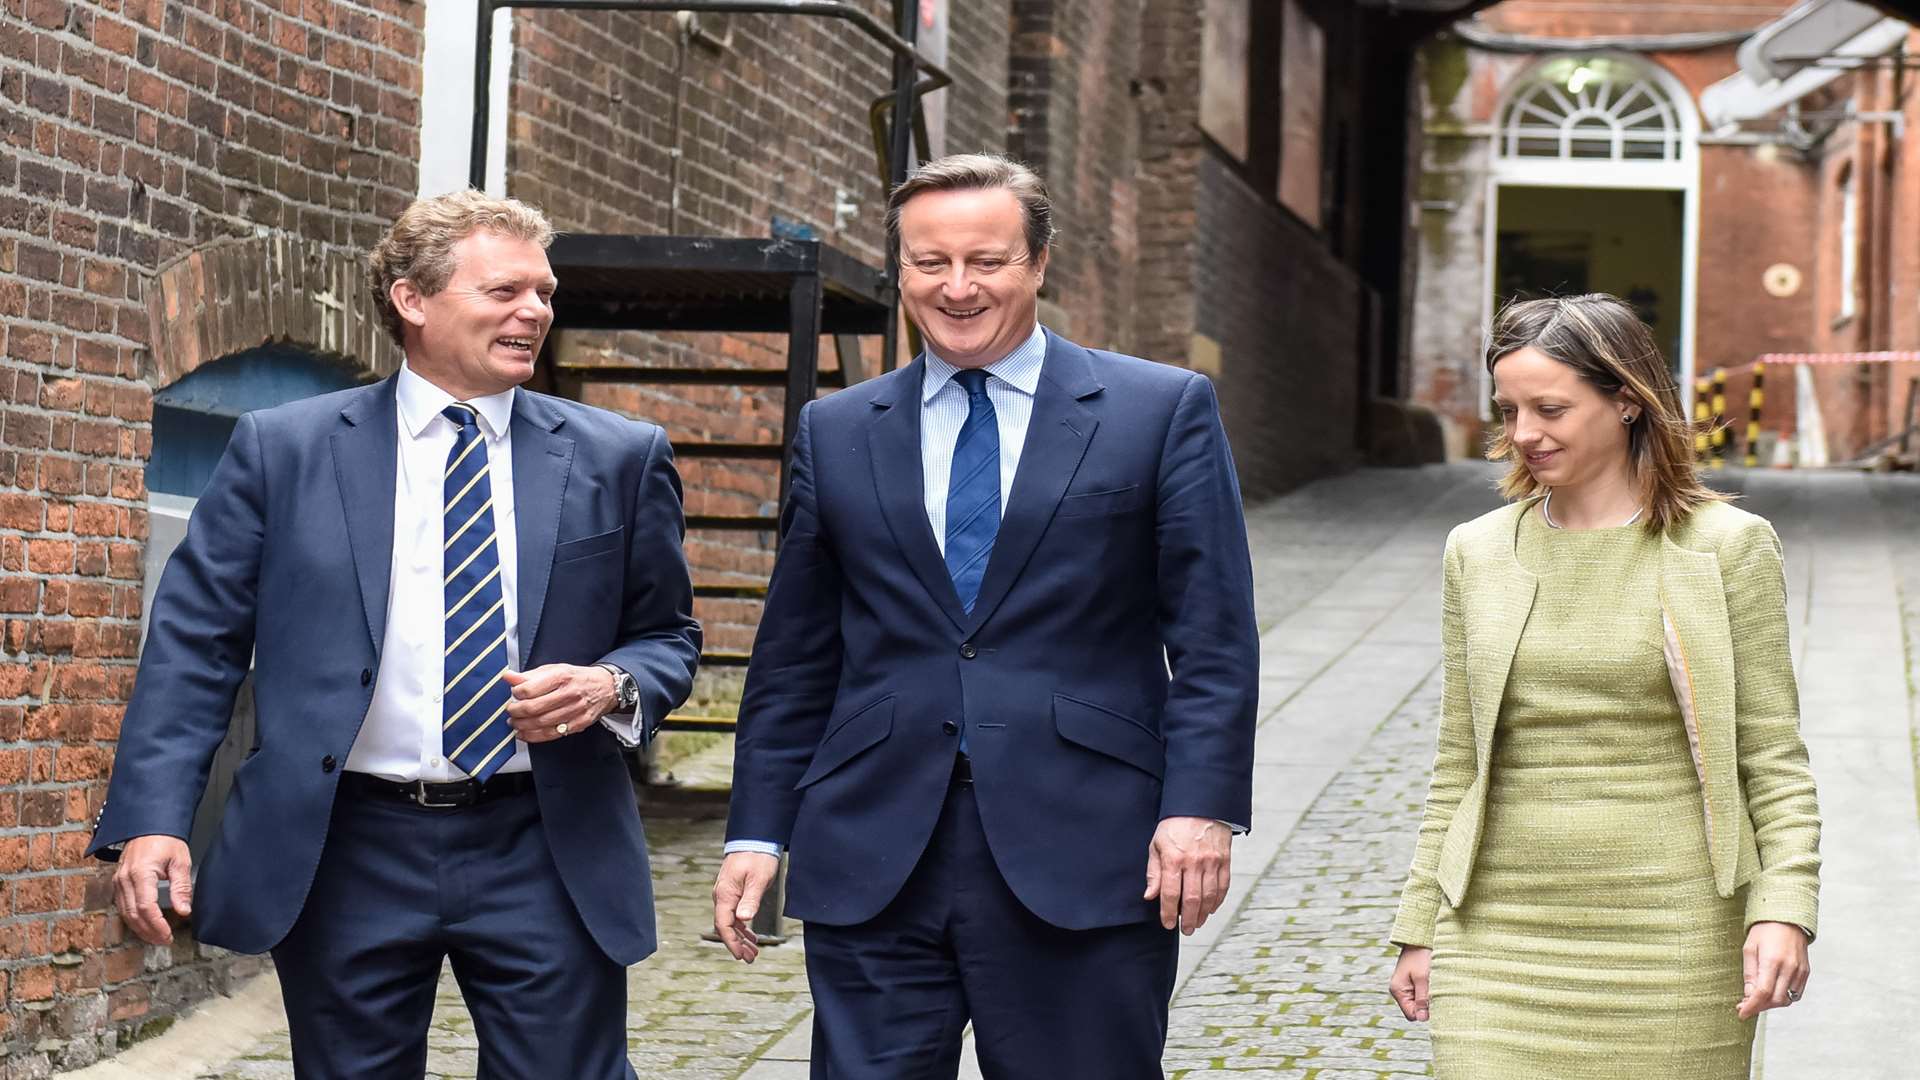 Chief executive of Shepherd Neame Jonathan Neame with Prime Minister David Cameron and Faversham MP Helen Whately in Faversham today.